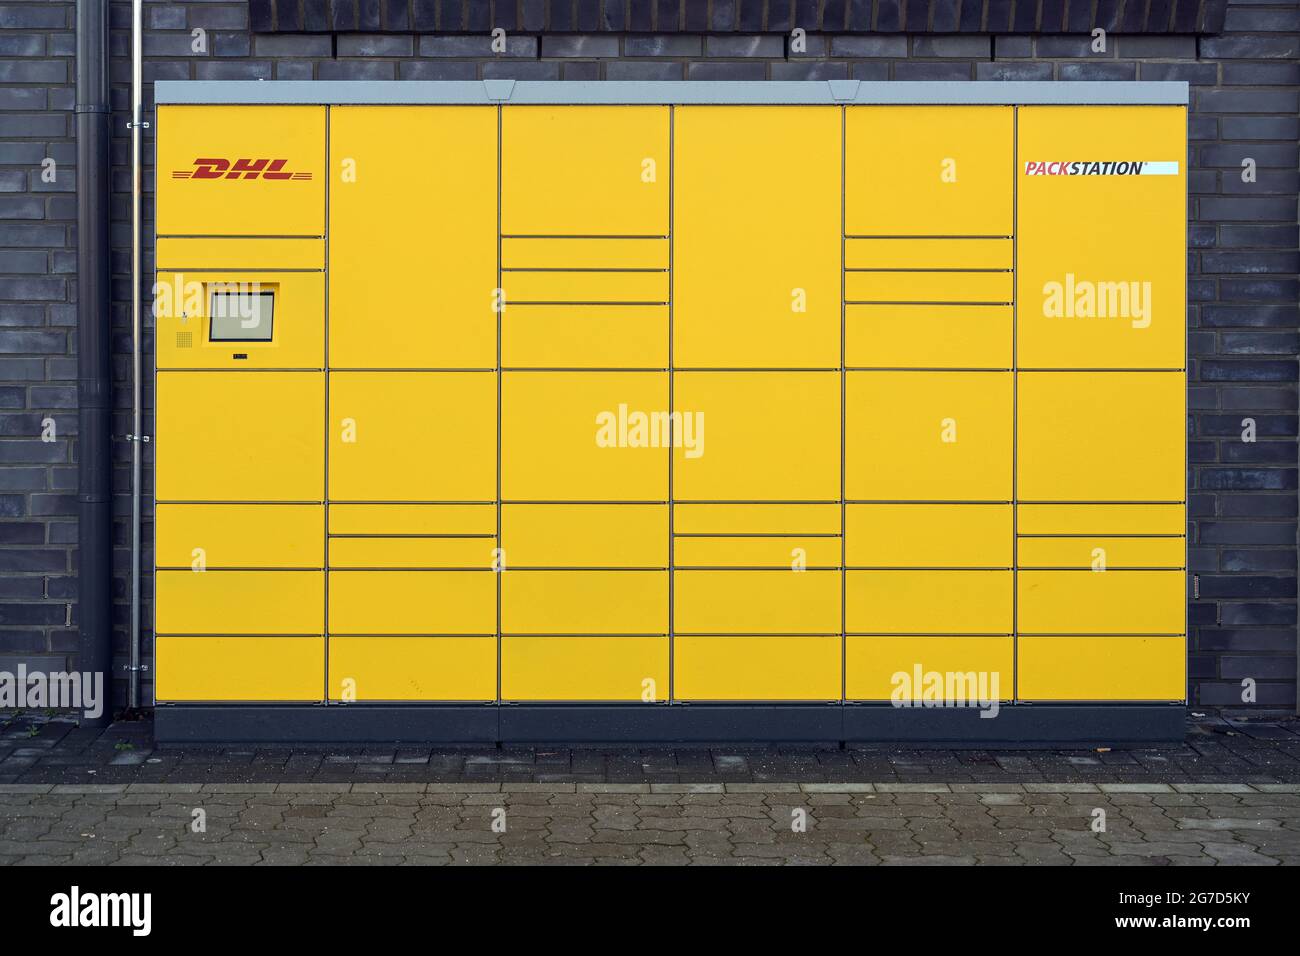 Ratzeburg, Germany, January 12, 2021: Front view of a DHL Packstation (packing station) with boxes where customers can send and pick up their packages Stock Photo